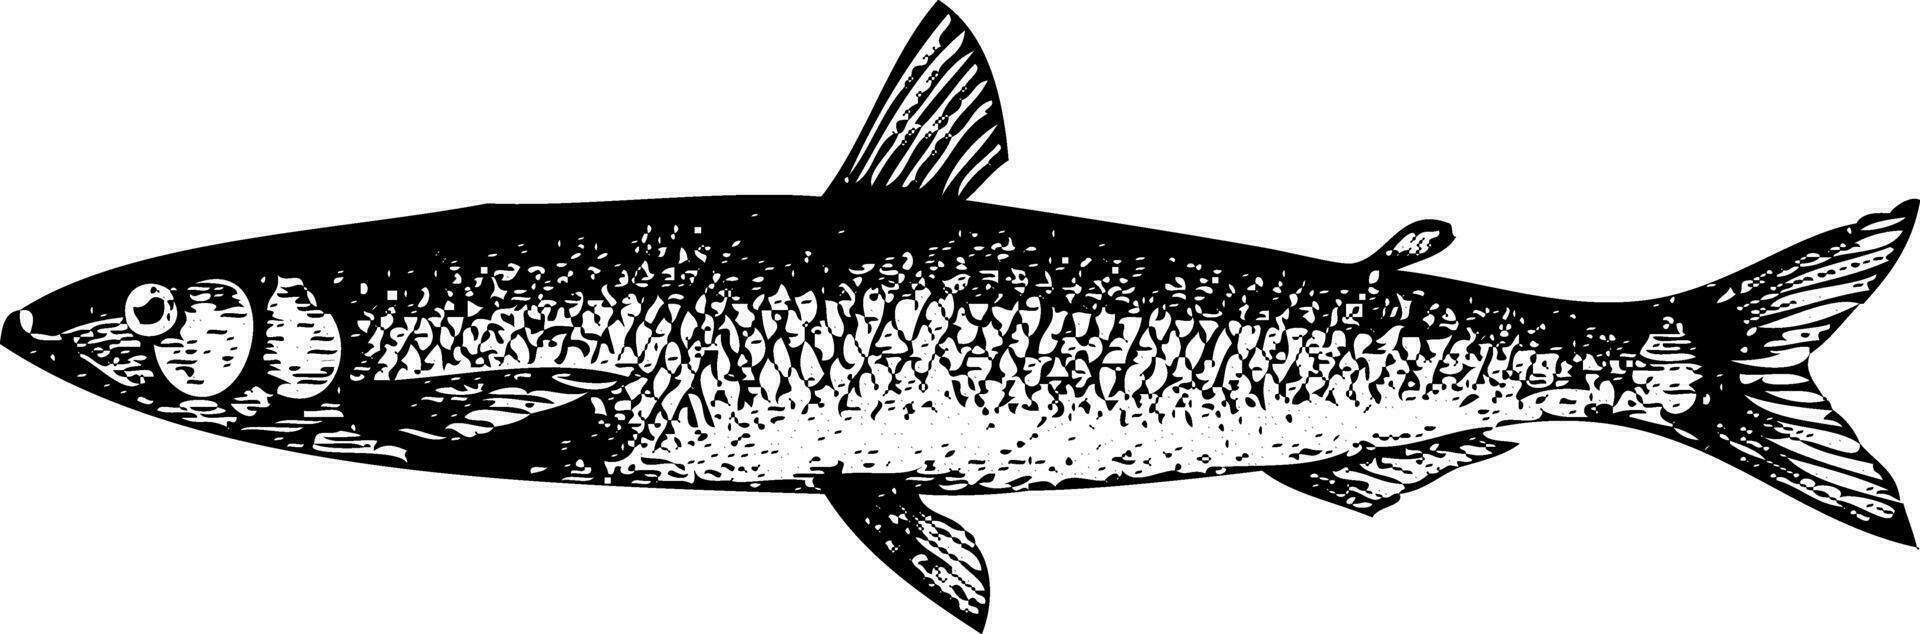 Old engraving of a European smelt fish or osmerus eperlanus vector